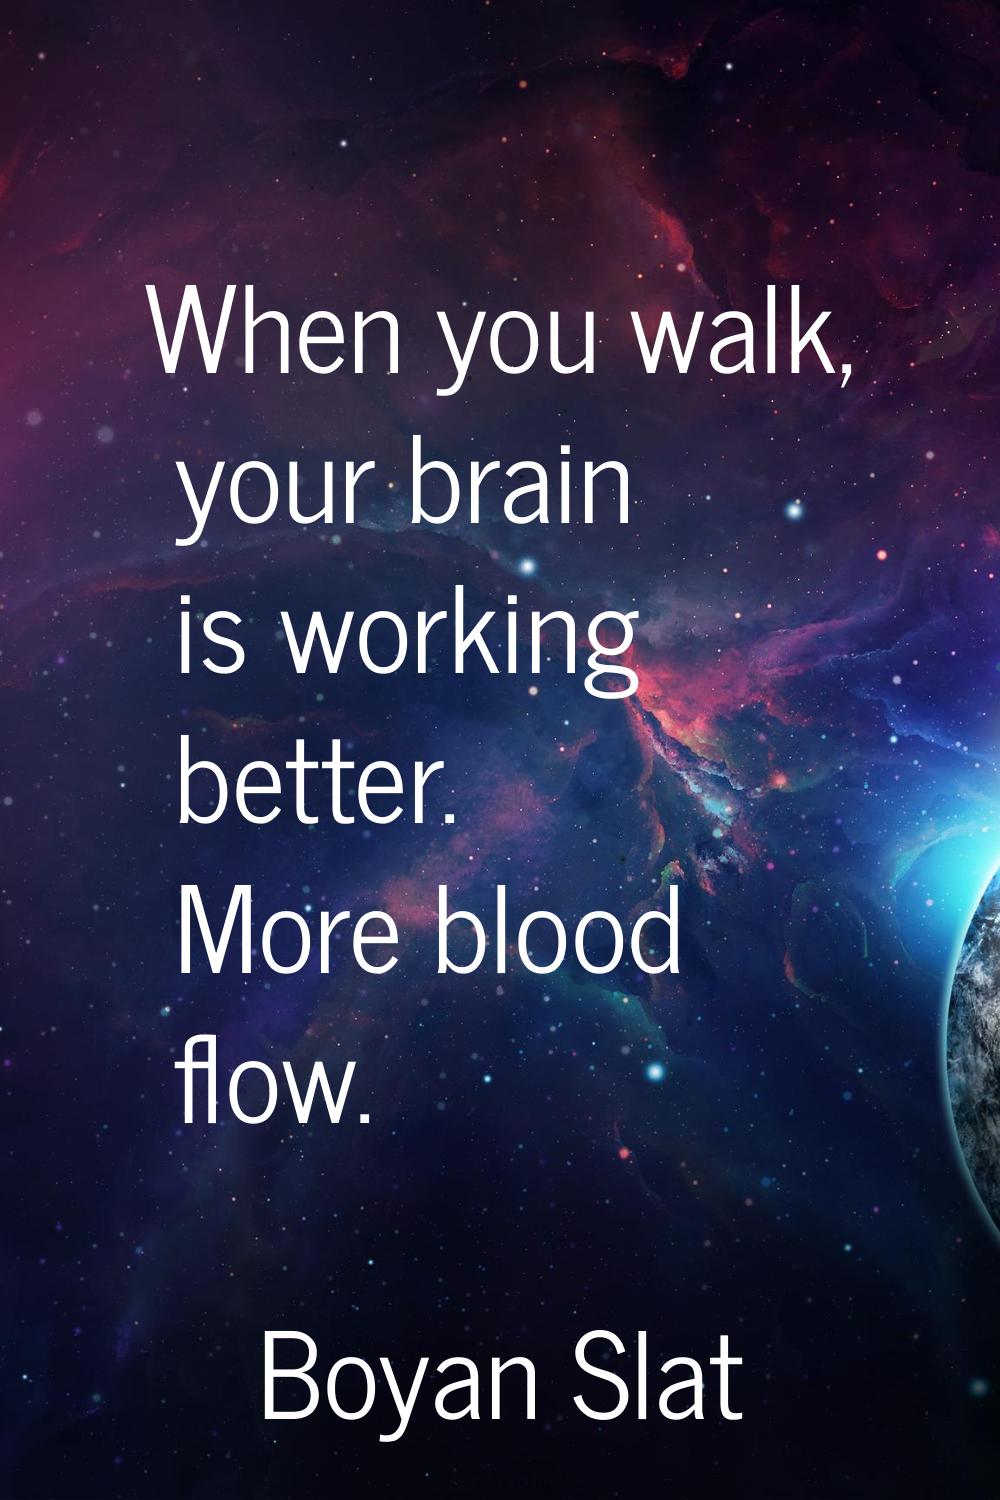 When you walk, your brain is working better. More blood flow.